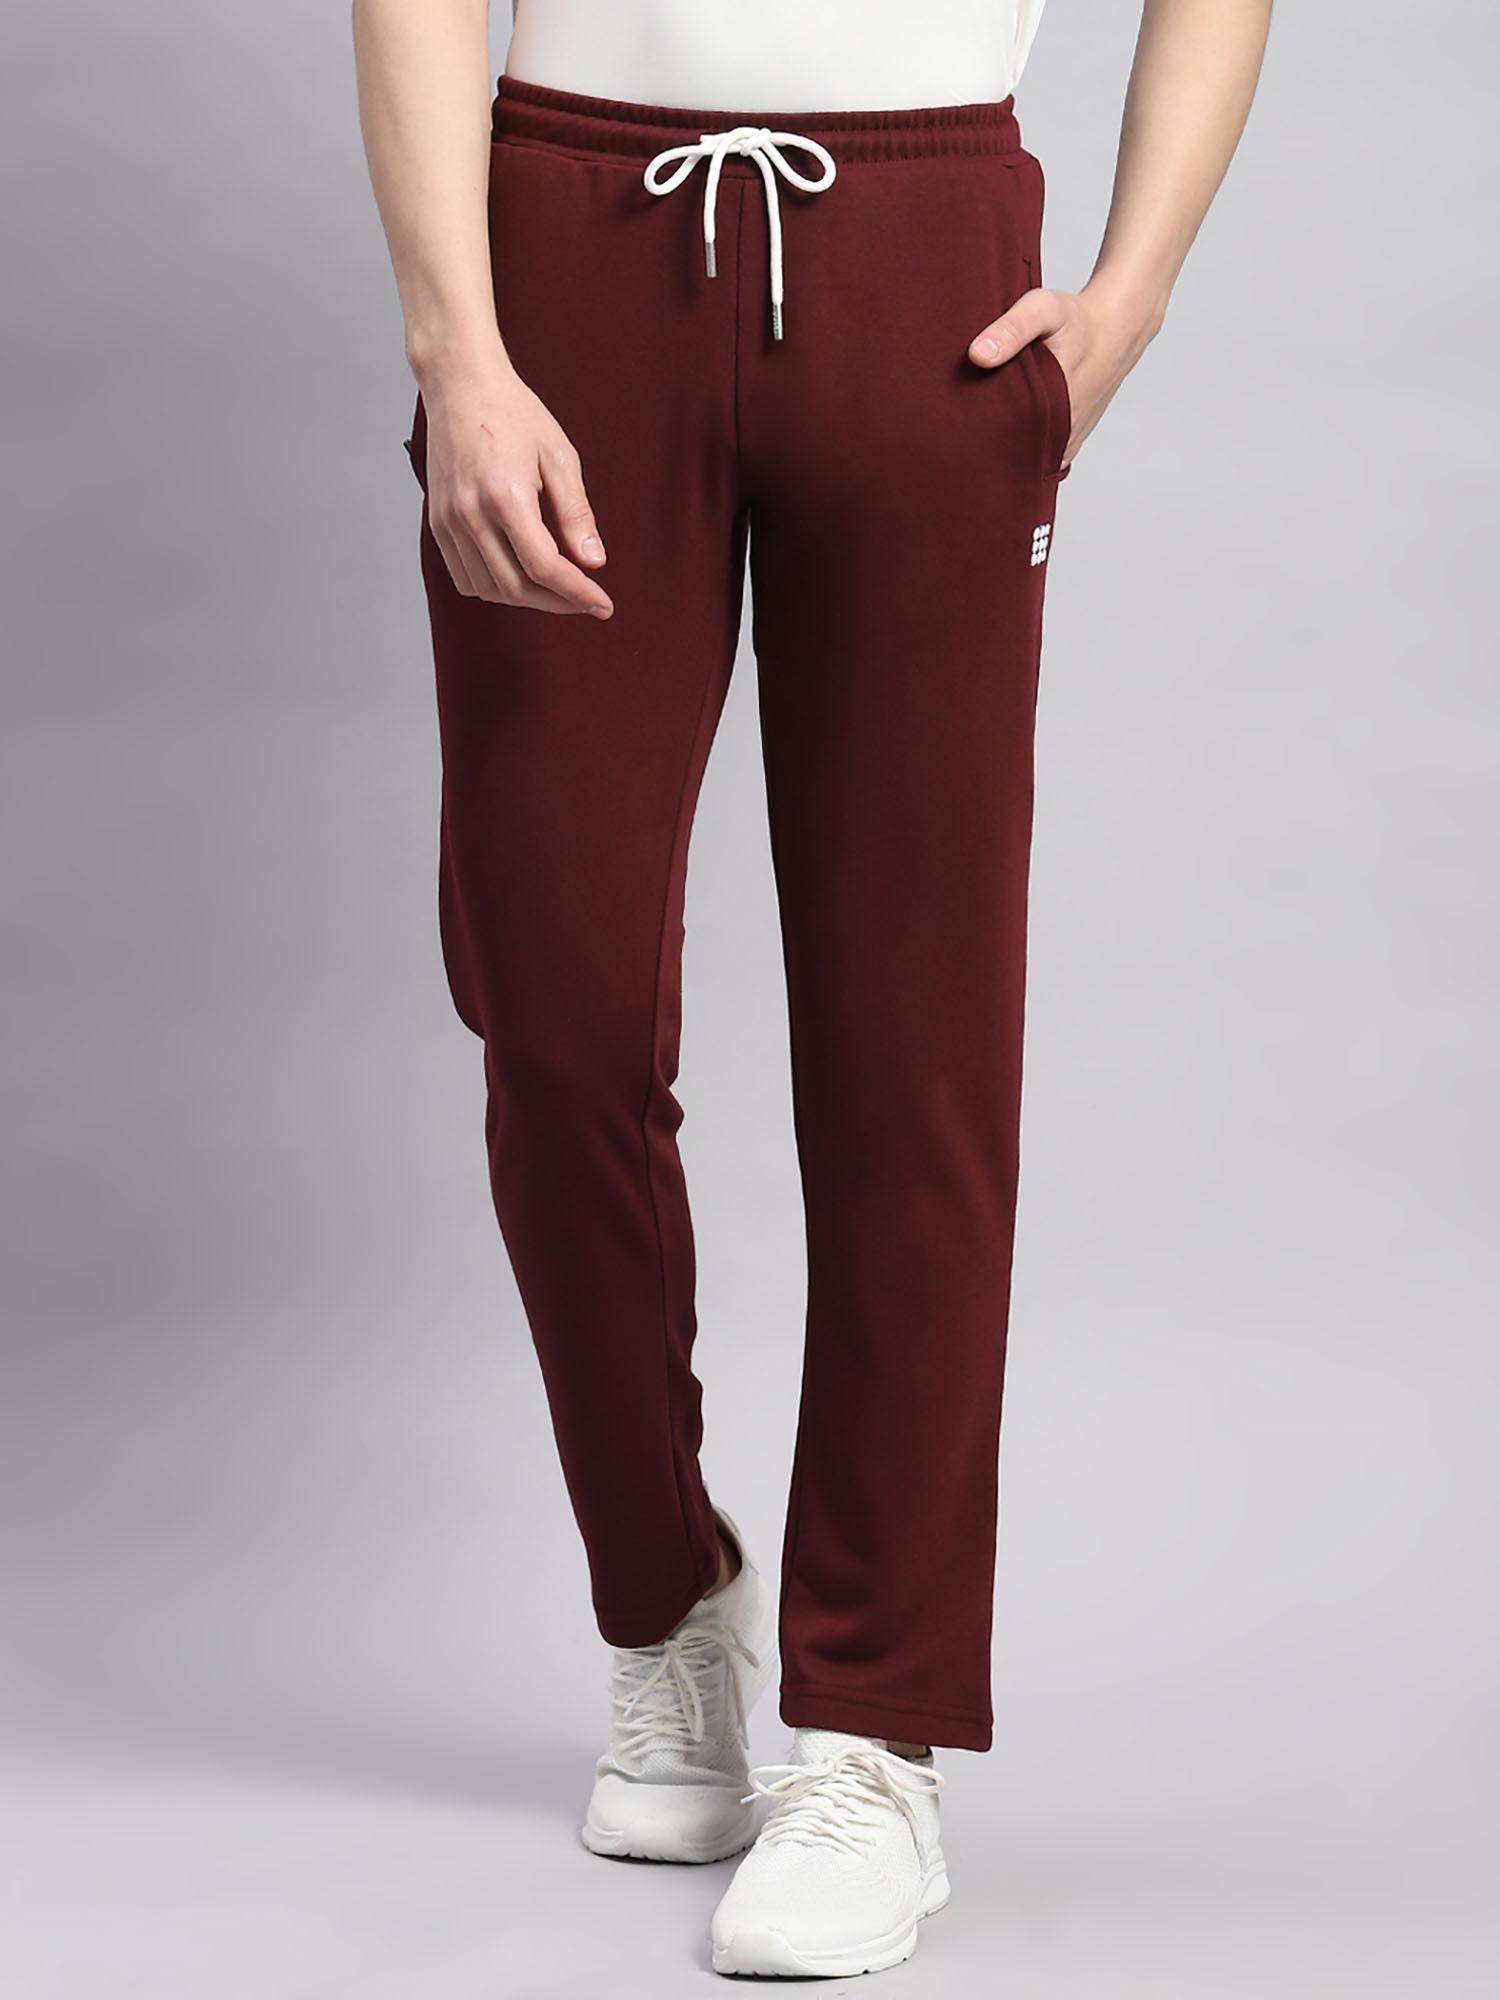 from-house-of-mens-maroon-solid-cotton-blend-trackpant